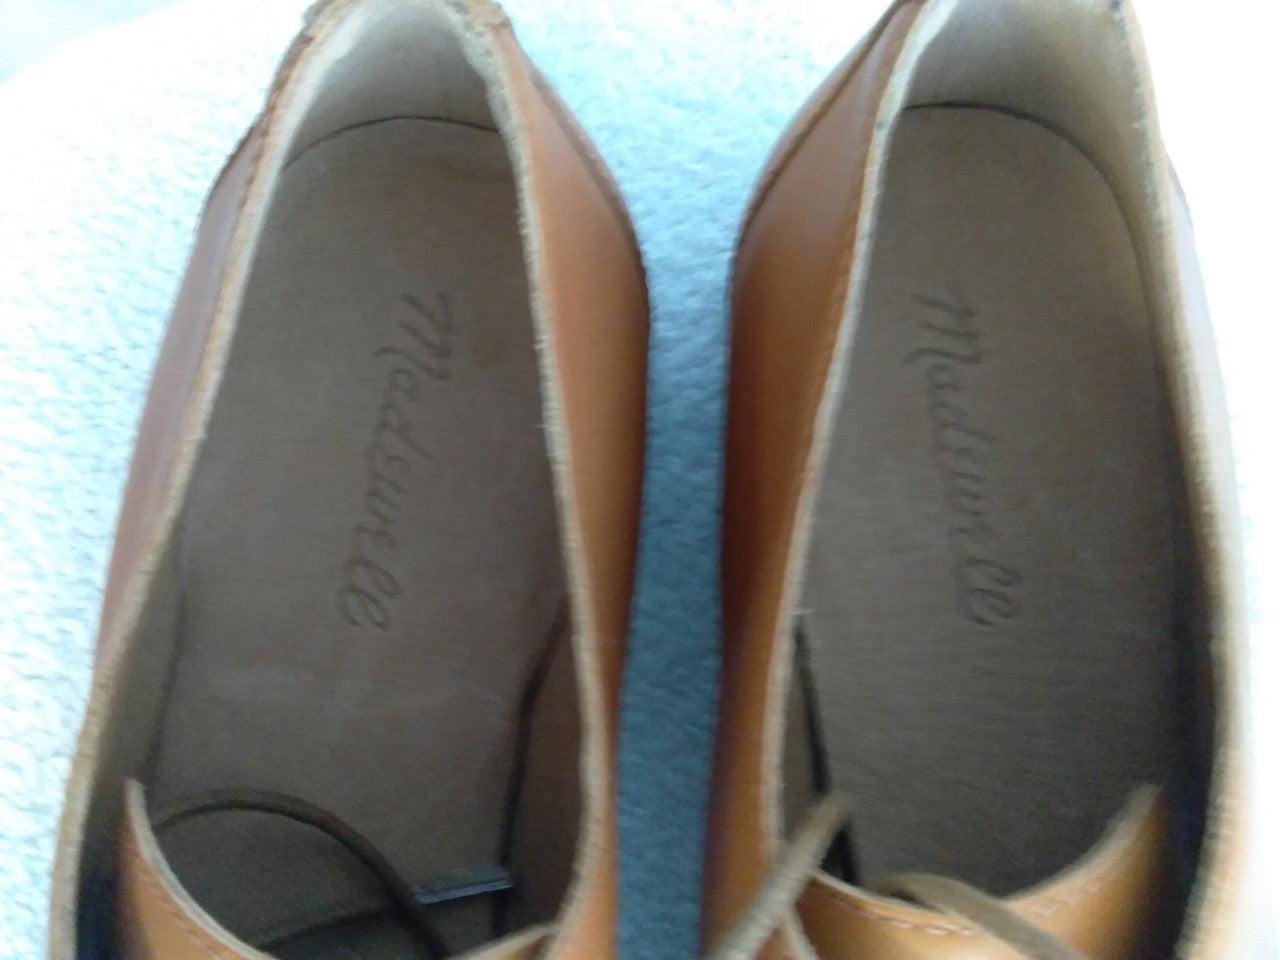 Madewell Leather Dress Shoes - Size: 10